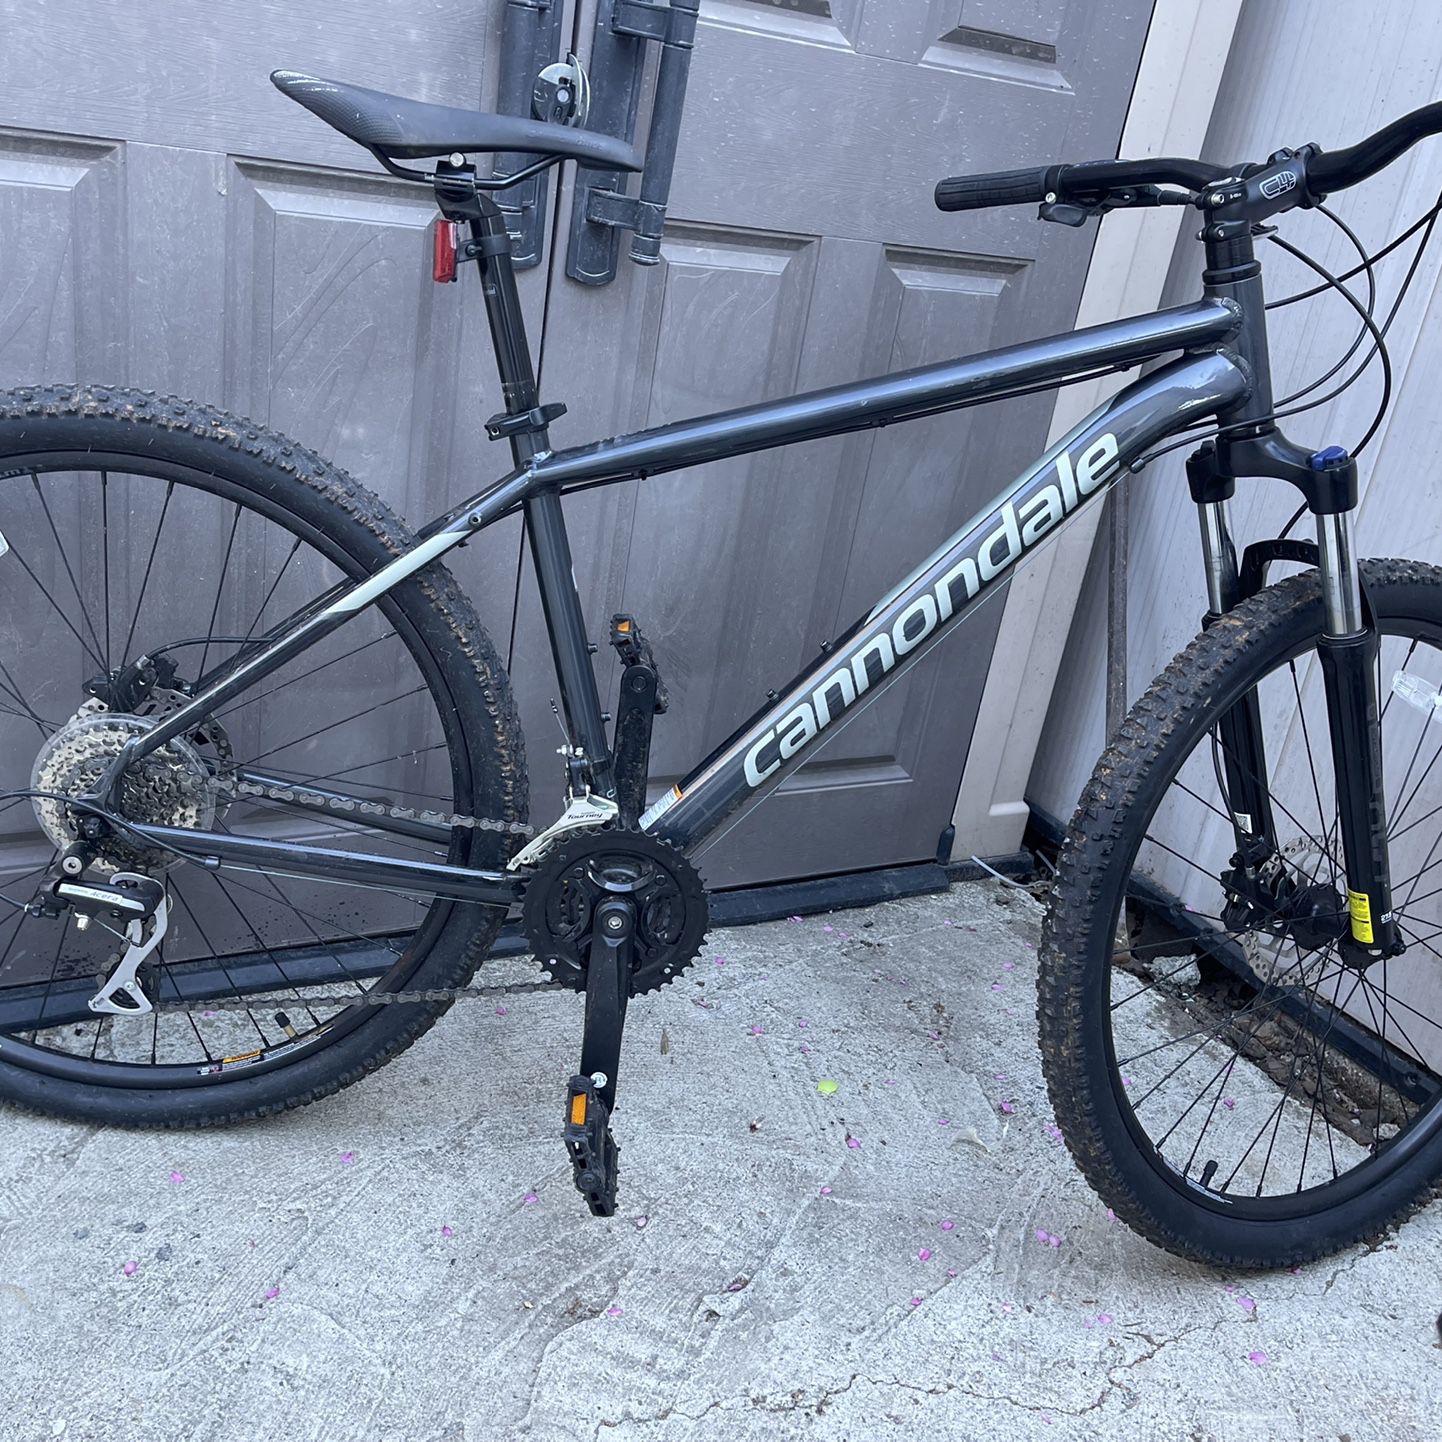 antwoord Behoren mild 2019 Cannondale Catalyst 1 (M) for Sale in Santa Rosa, CA - OfferUp